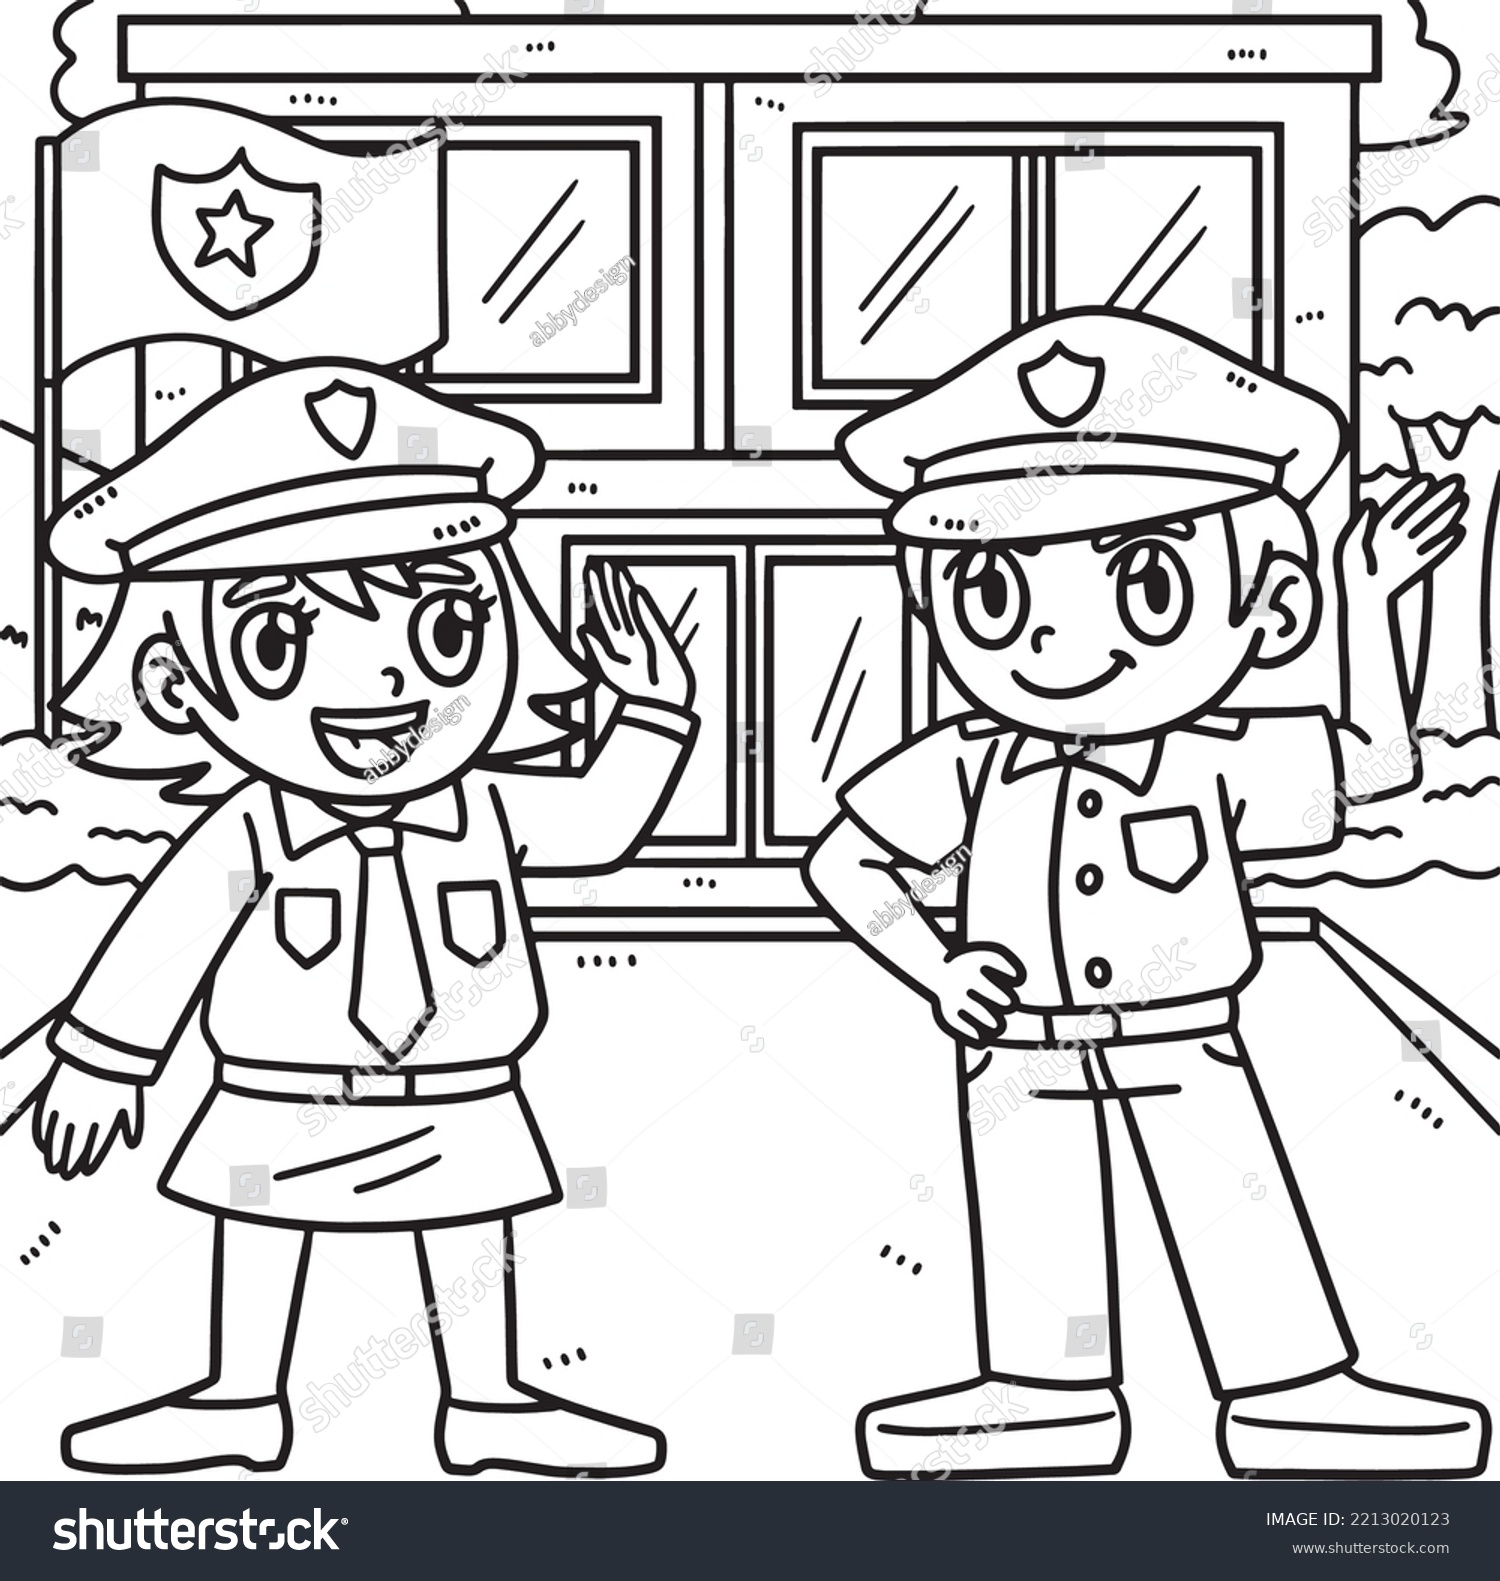 Police Officers Talking Coloring Page Kids Stock Vector (Royalty Free ...